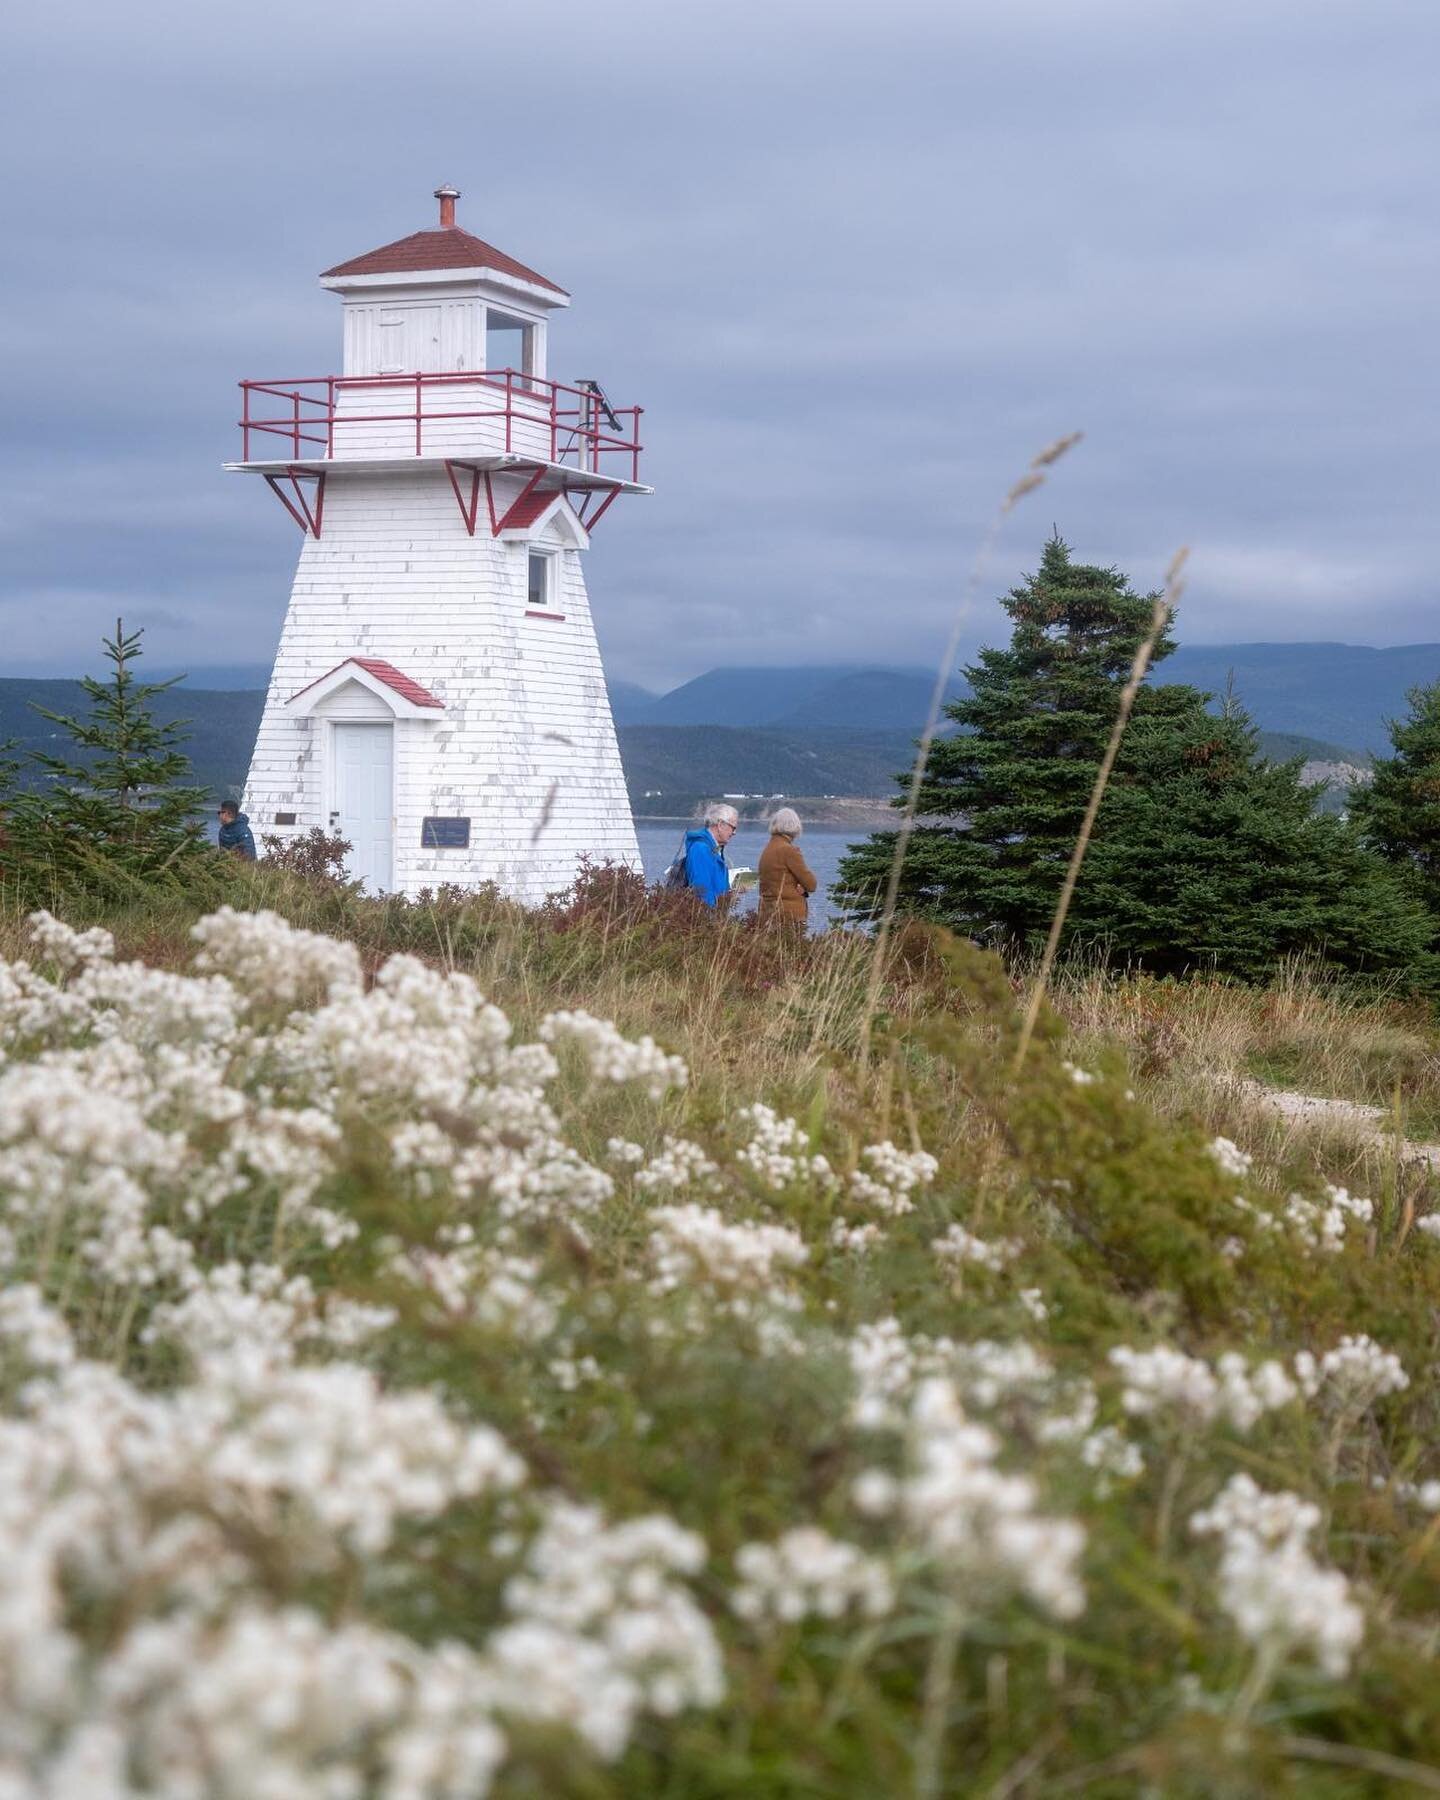 Bannikin team member @msanniebird recently returned from circumnavigating Newfoundland with @adventure.canada! She had the pleasure of hosting four journalists on an immersive and transformative journey to a unique part of Canada. 
&nbsp;
Talented mu